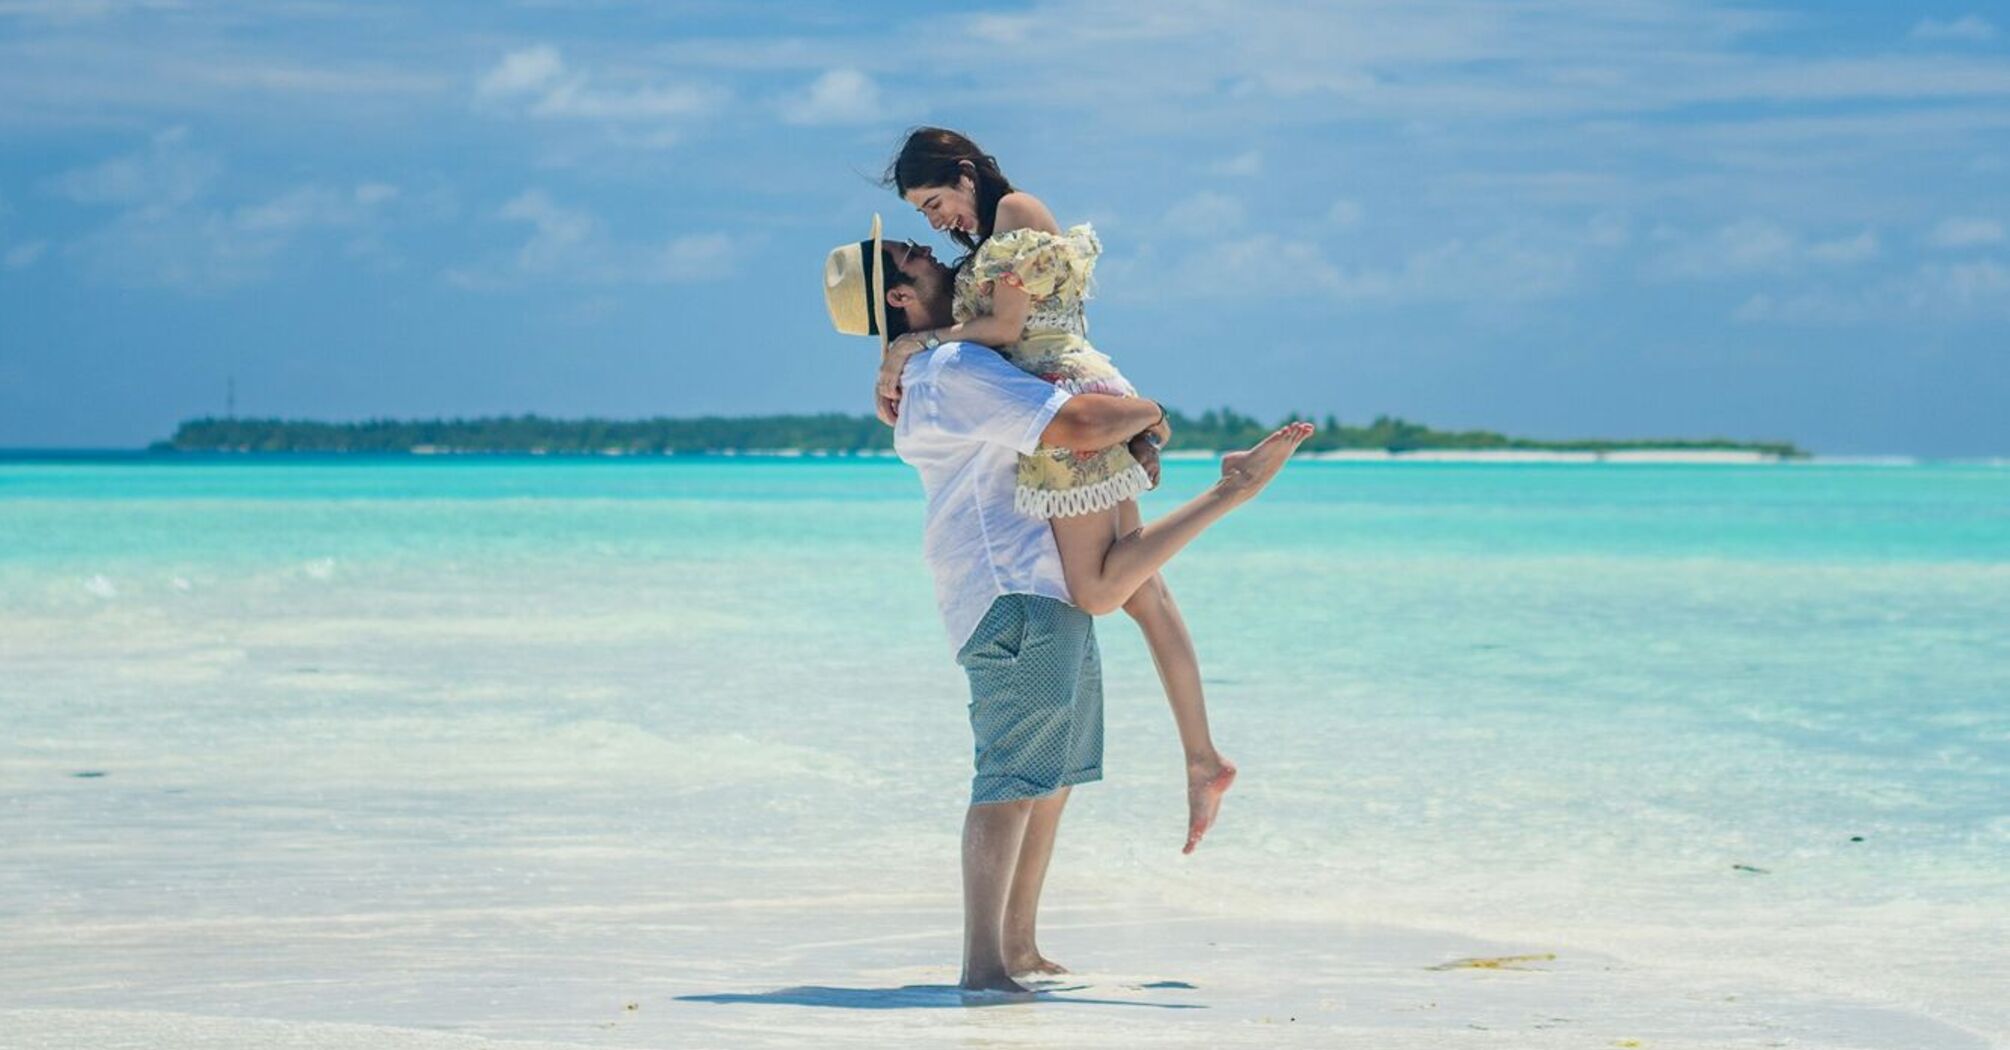 A joyful couple on a tropical beach, with a man carrying a woman in his arms